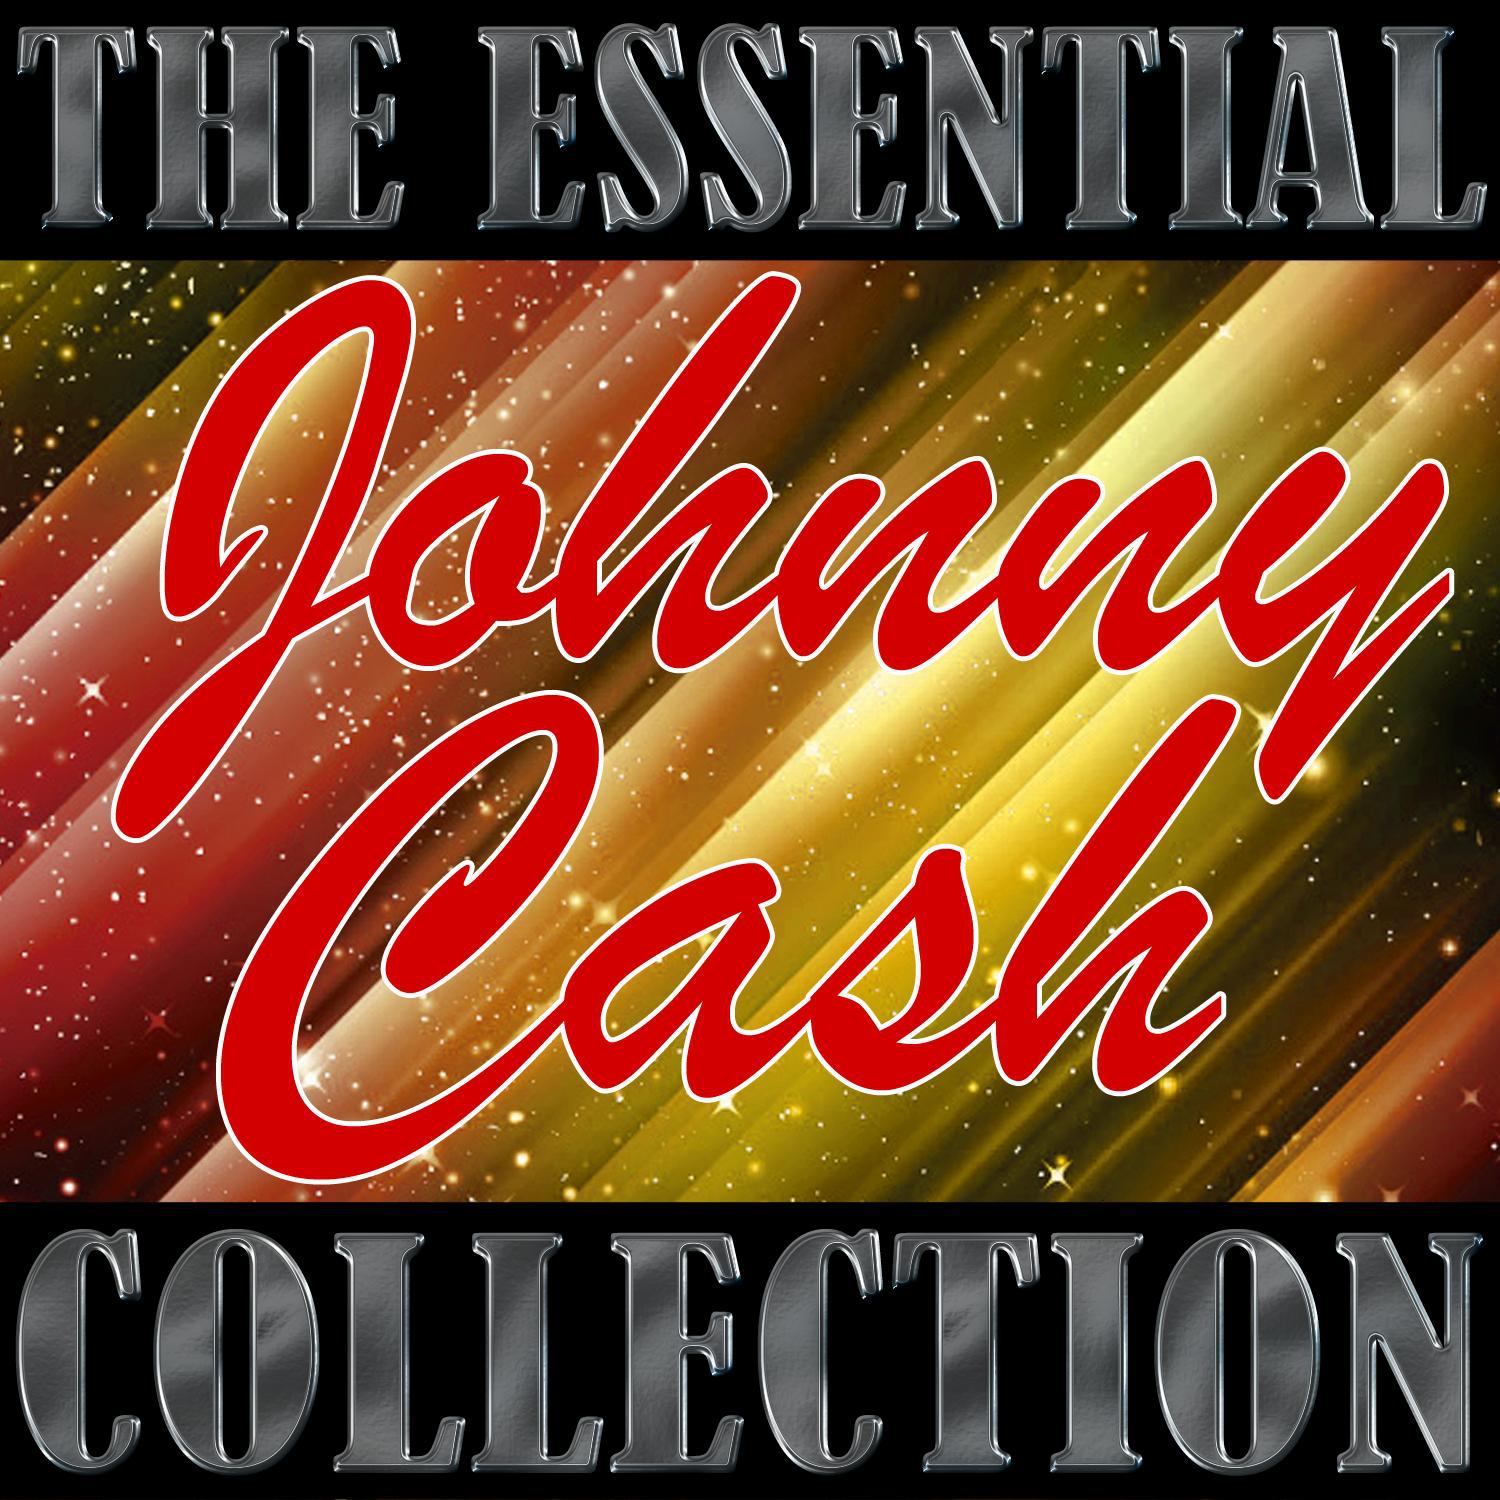 The Essential Collection: Johnny Cash专辑